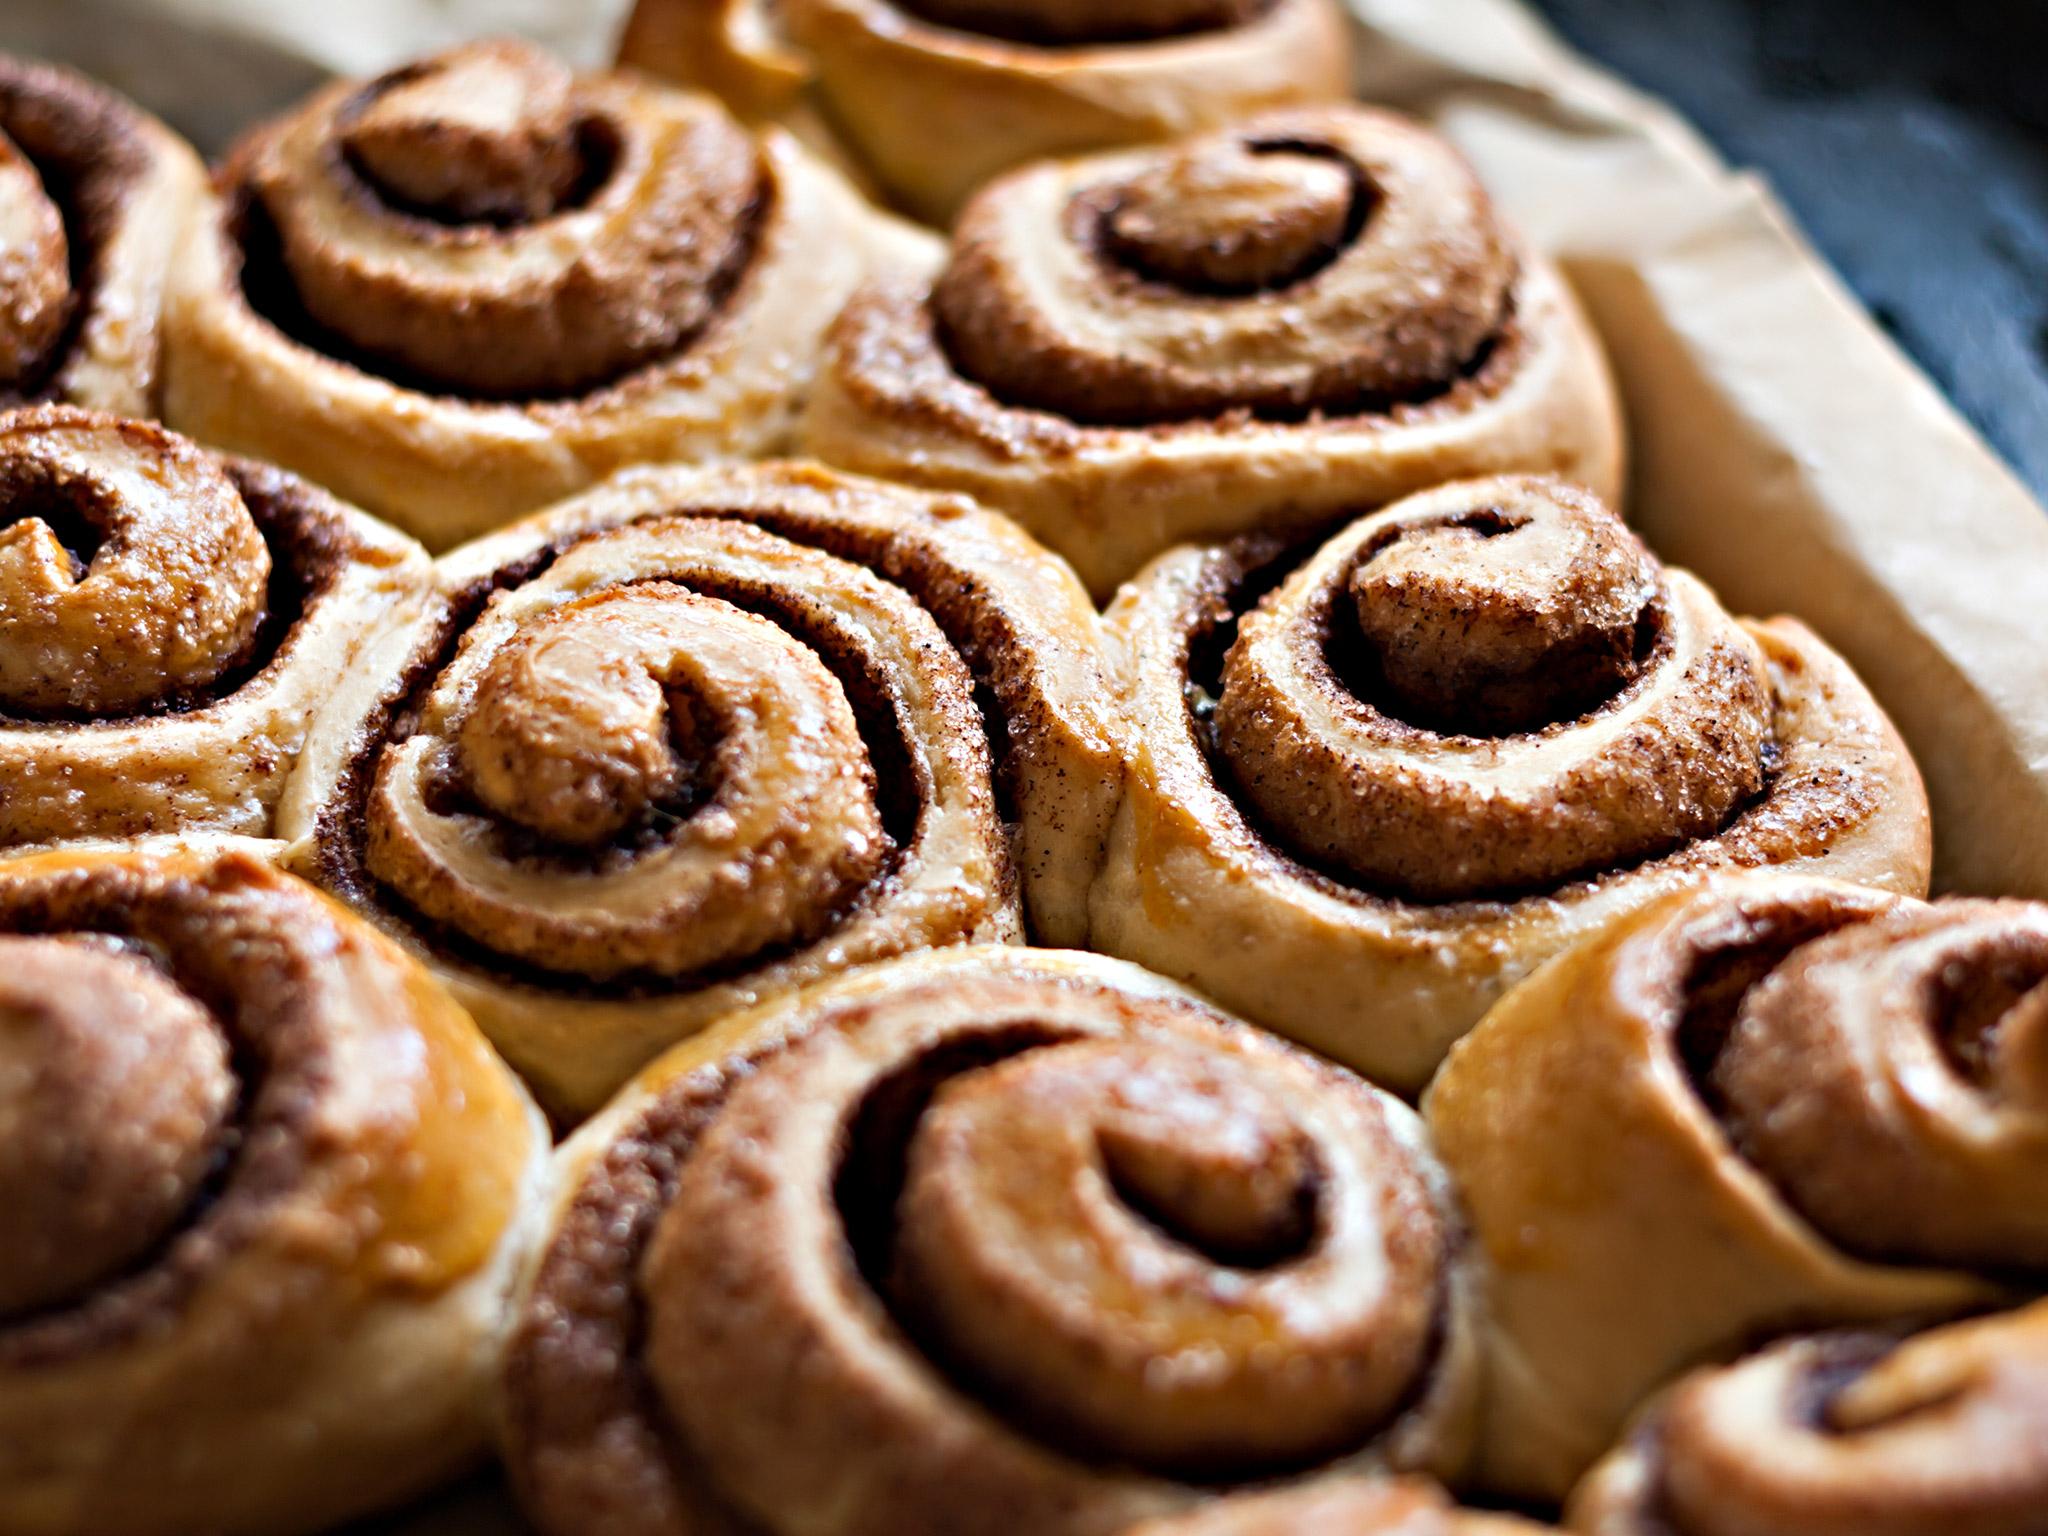 Cinnamon buns are a staple of Nordic baking